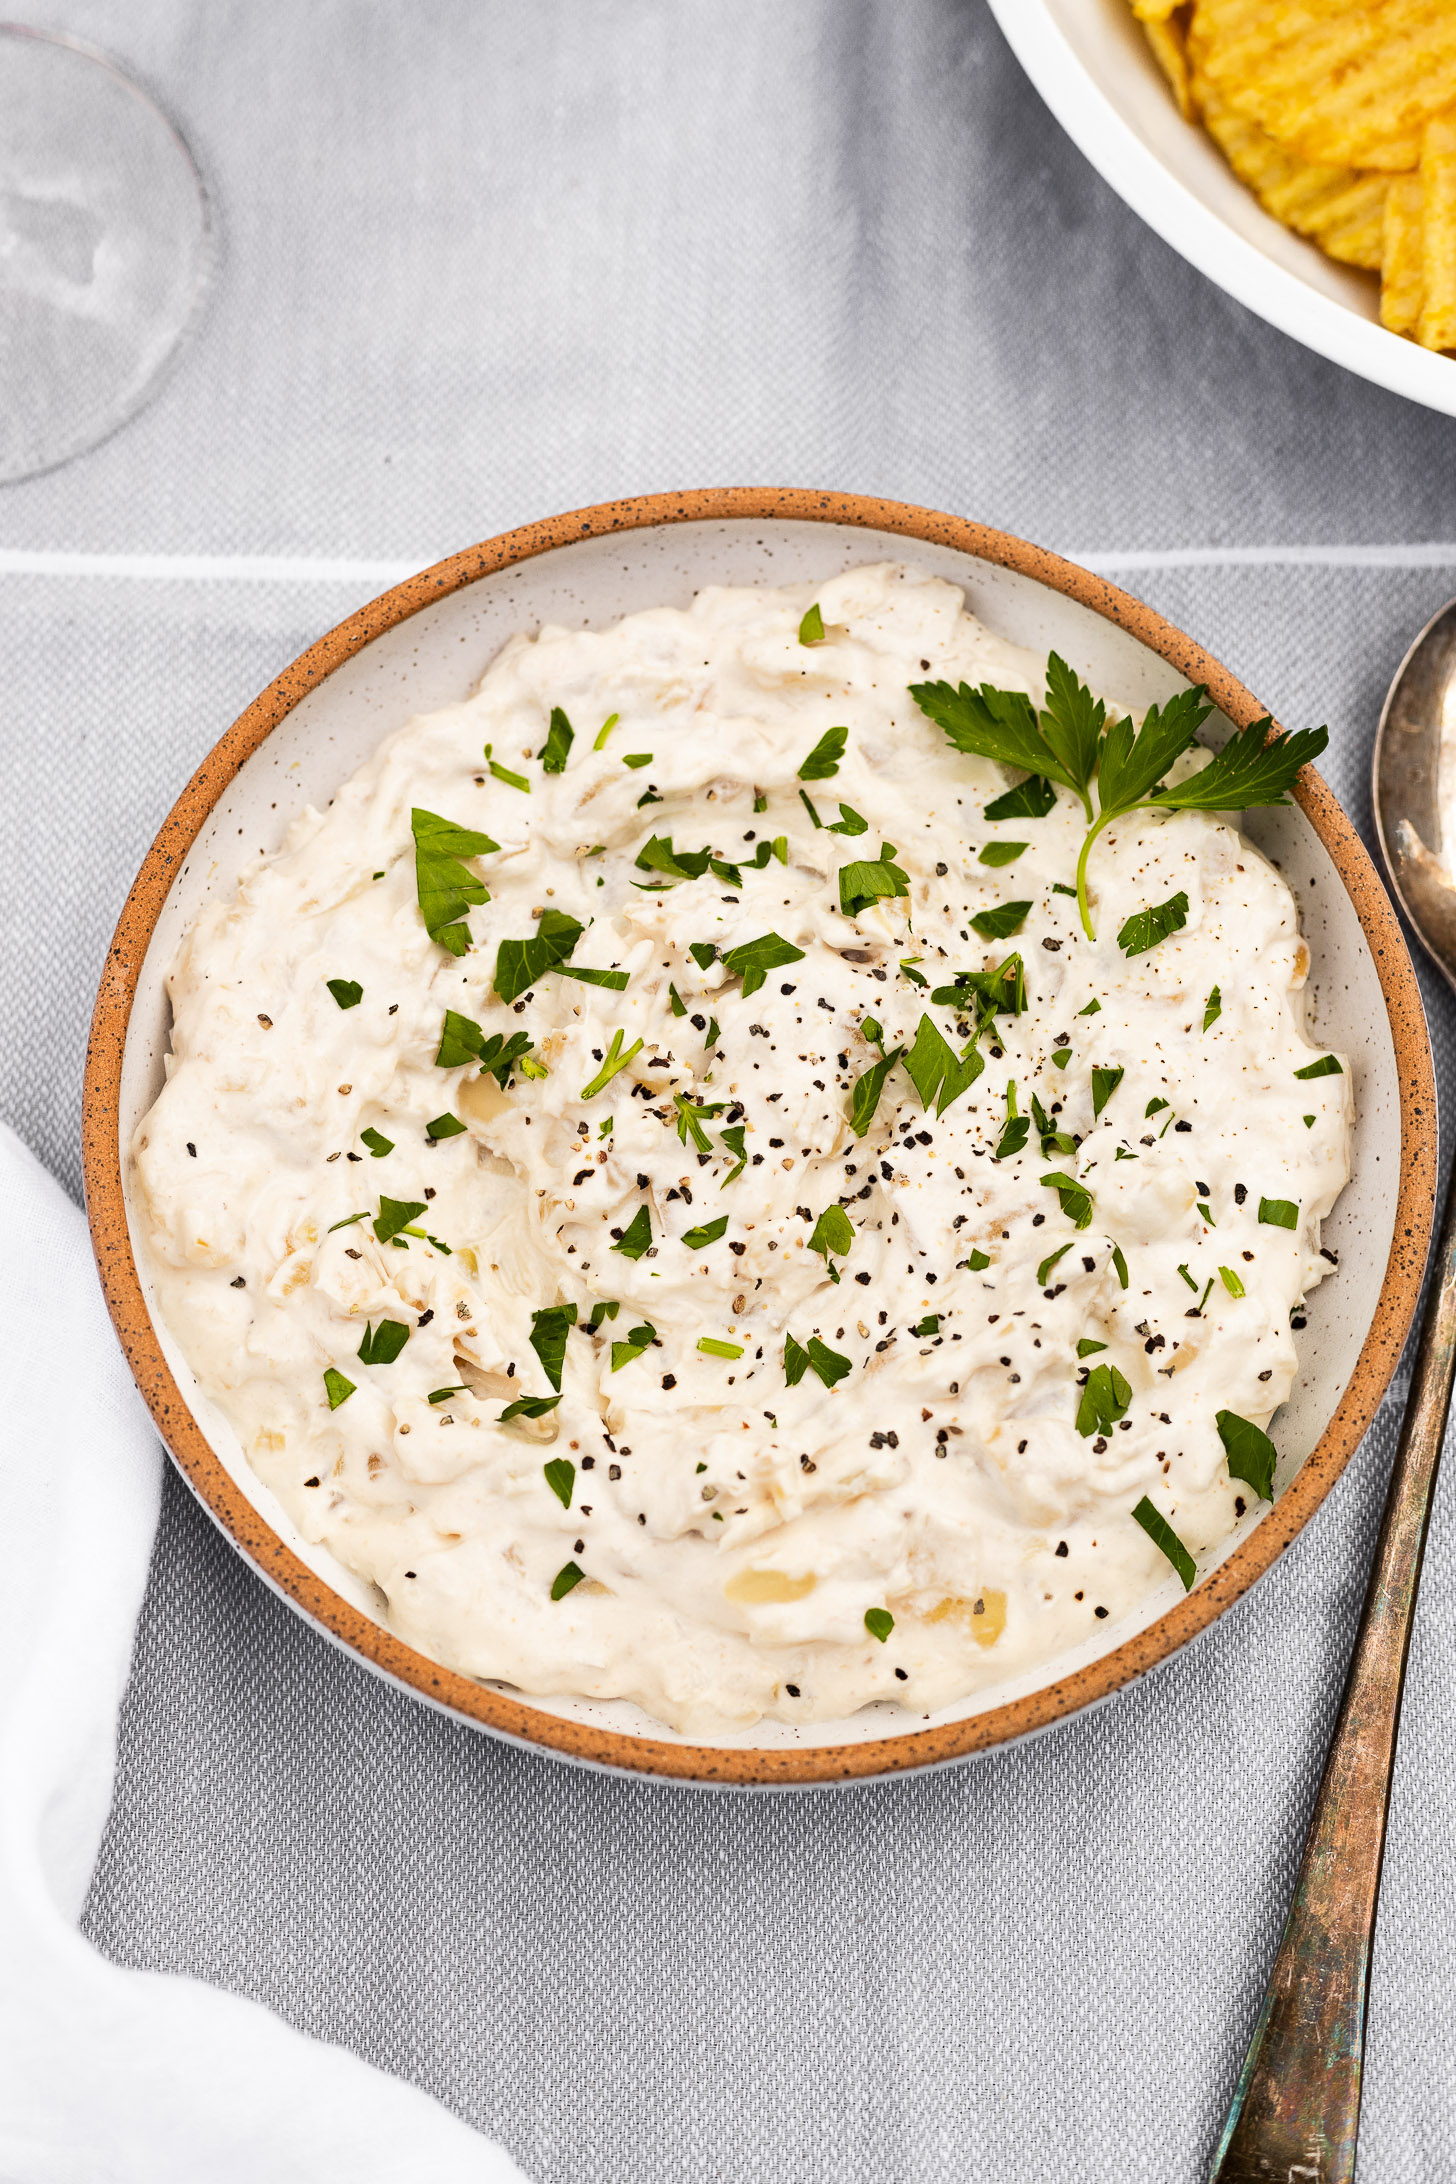 Bowl of onion dip with parsley garnish.